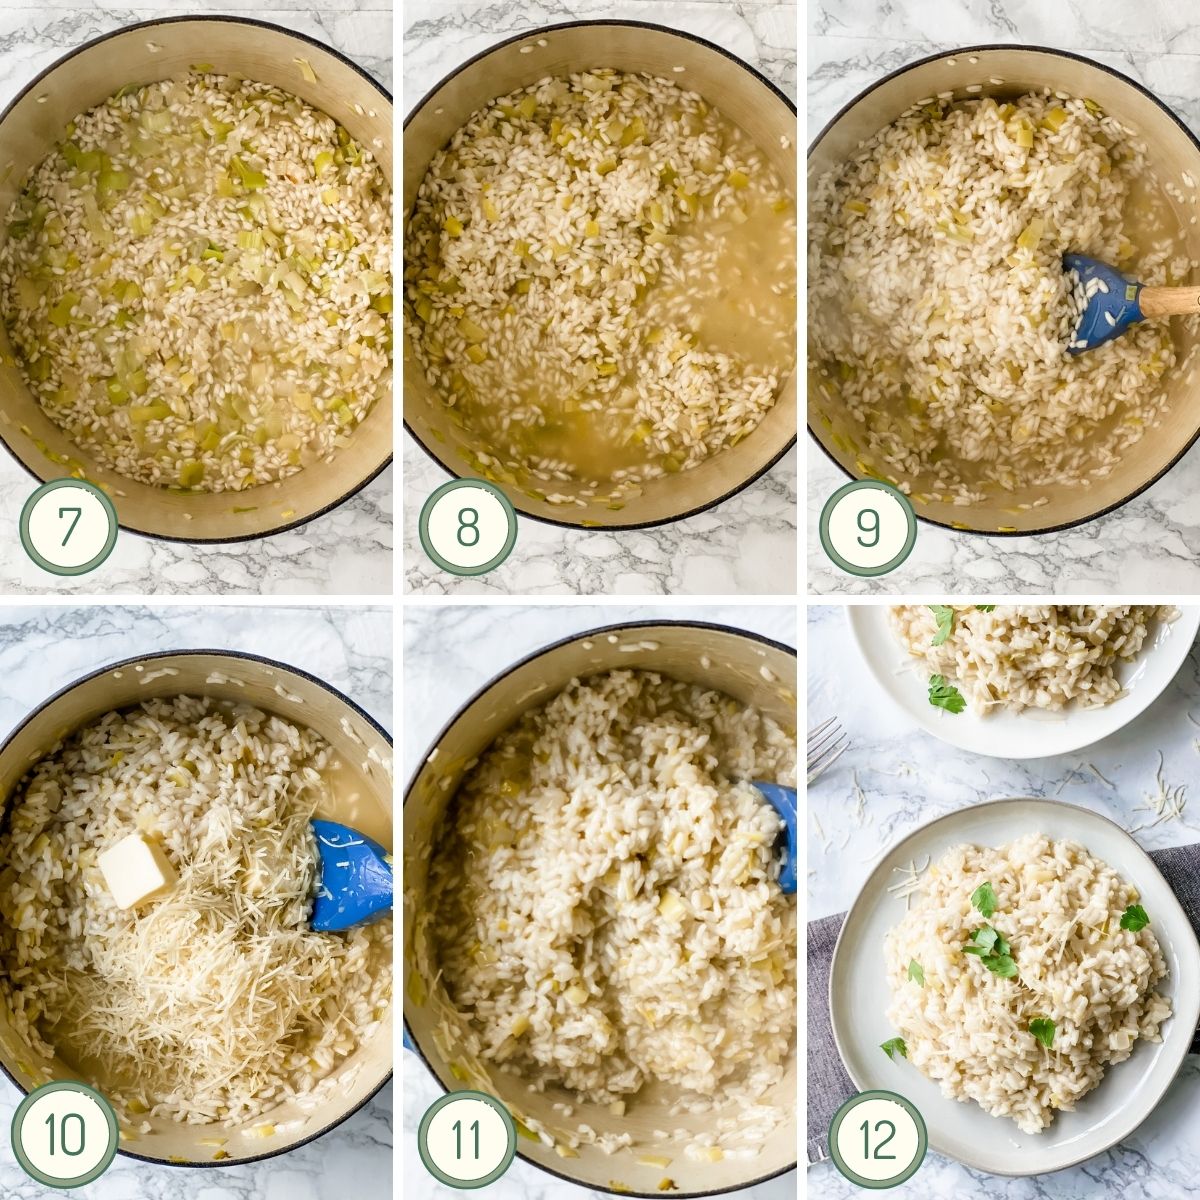 The last steps to making gluten free risotto.